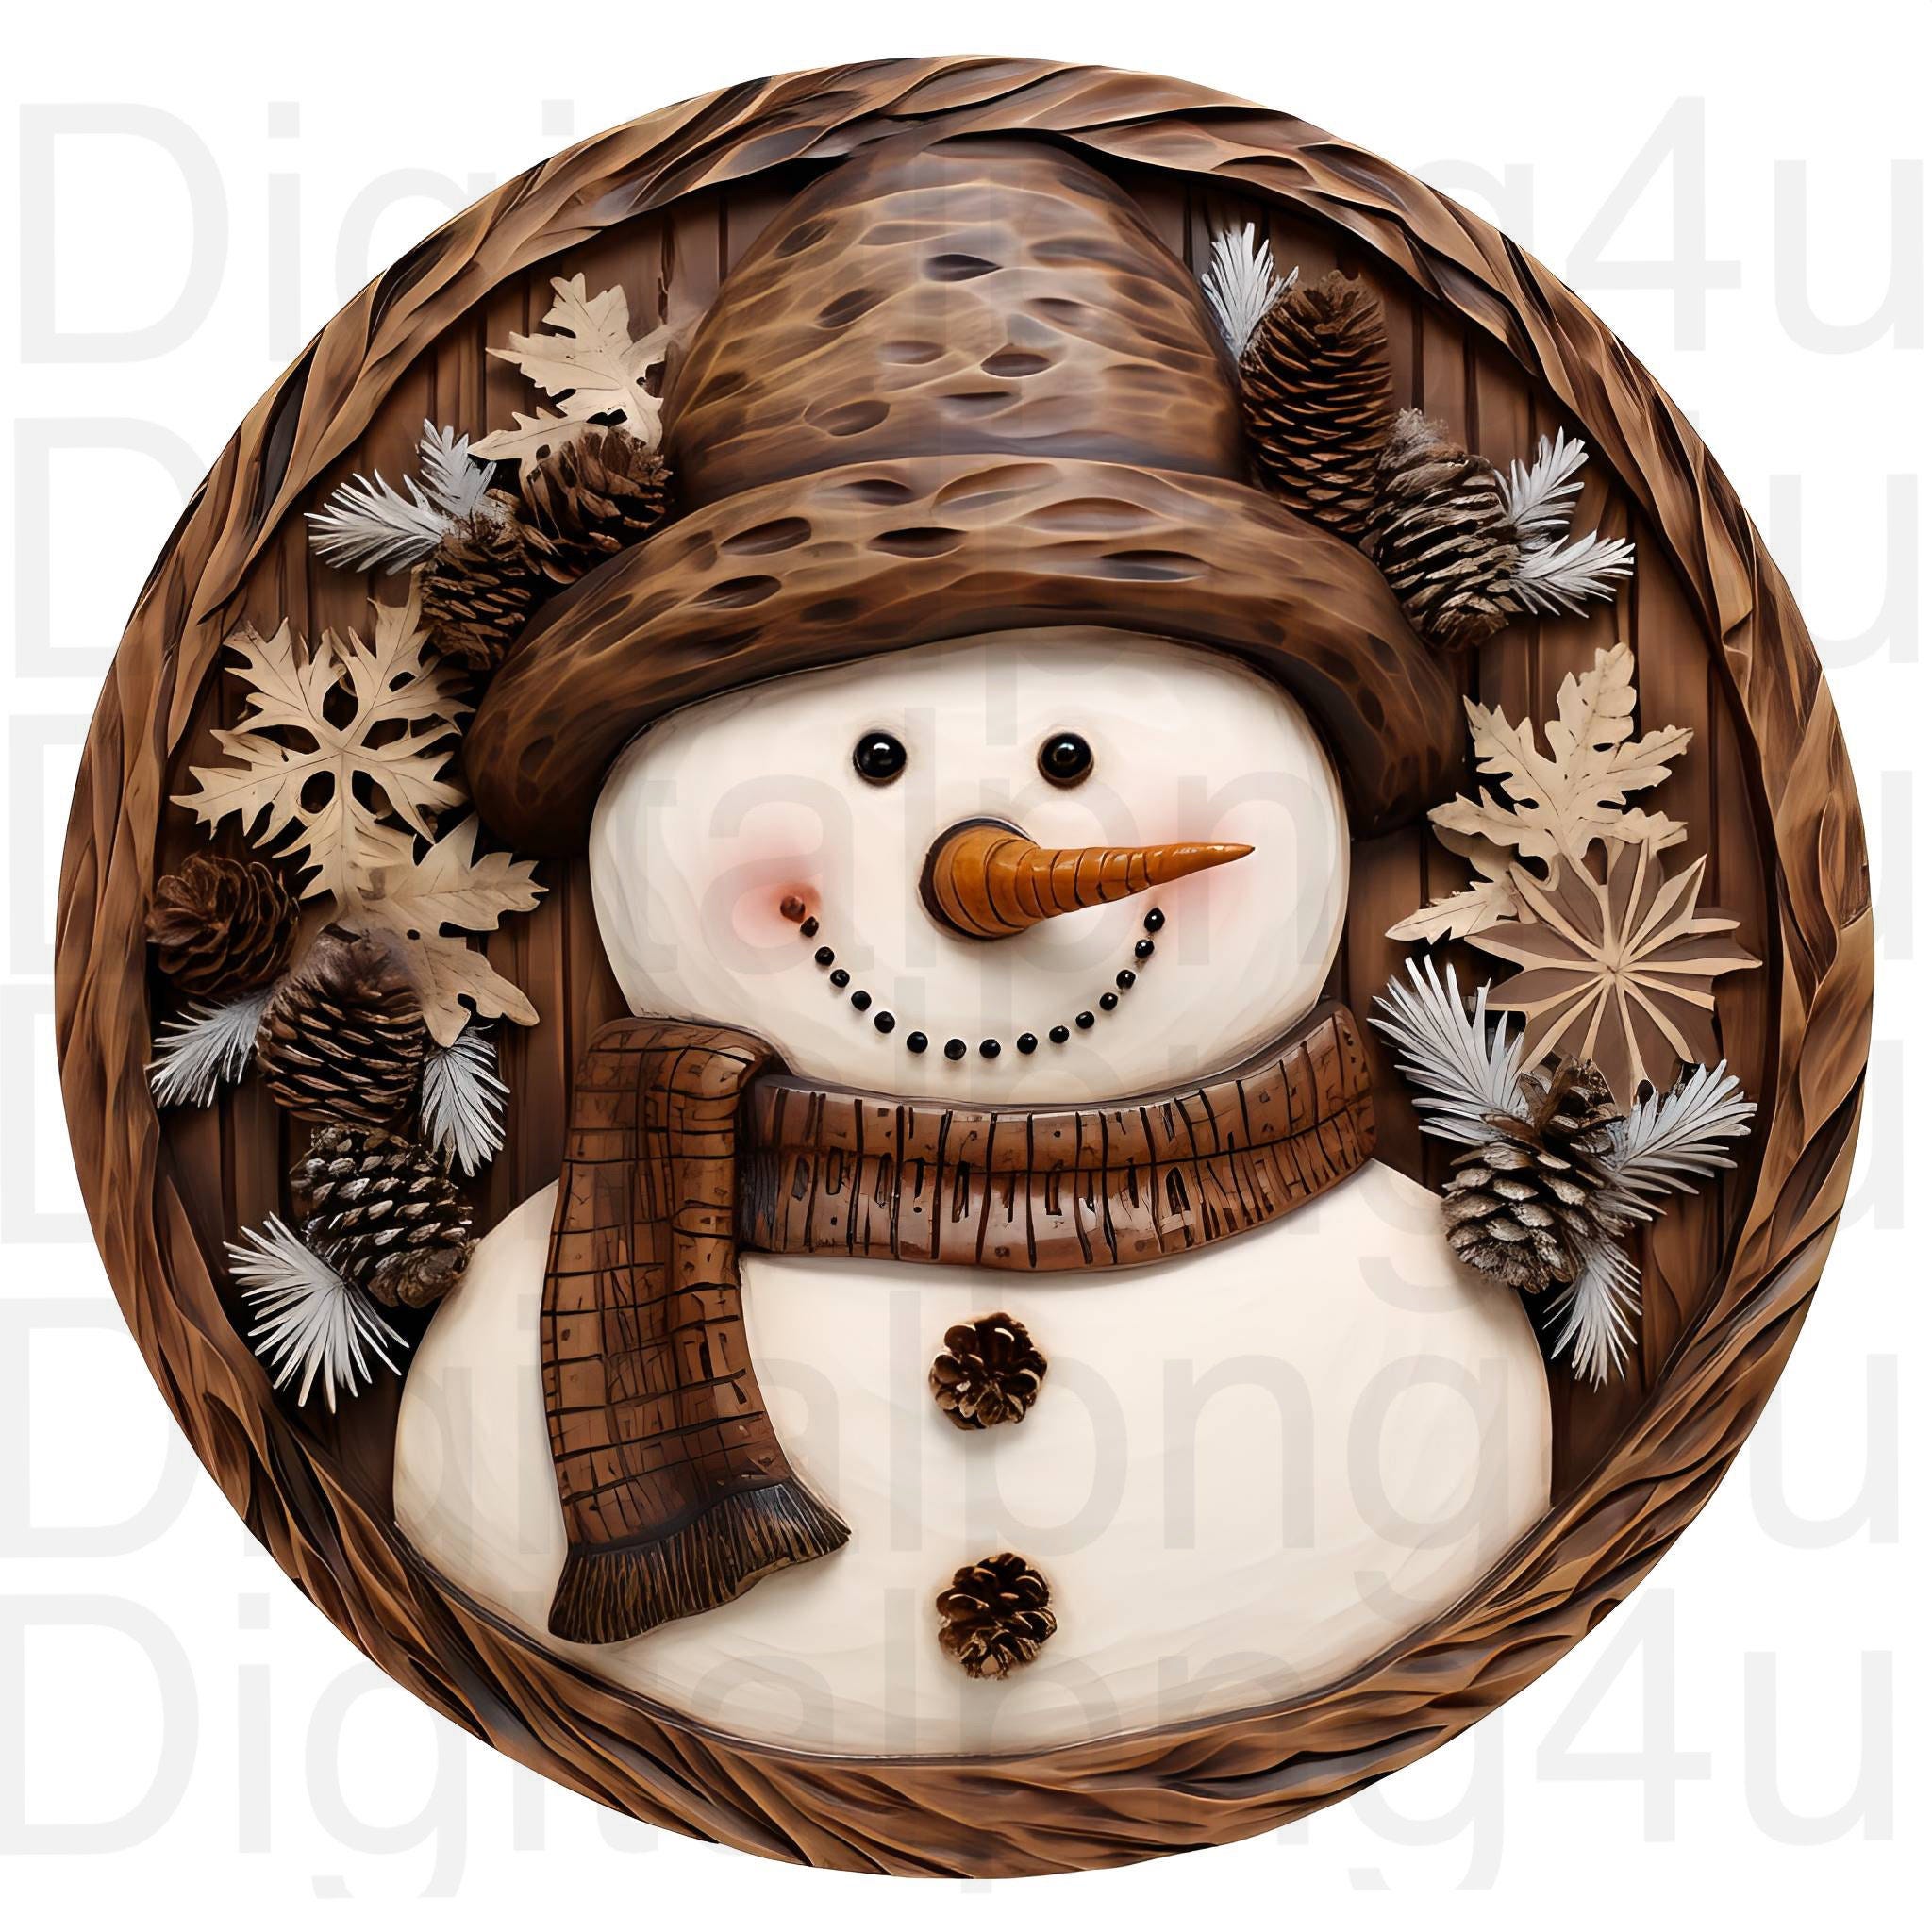 Snowman rustic Christmas round png sublimation digital design download wreath sign wind spinner cutting board Christmas image